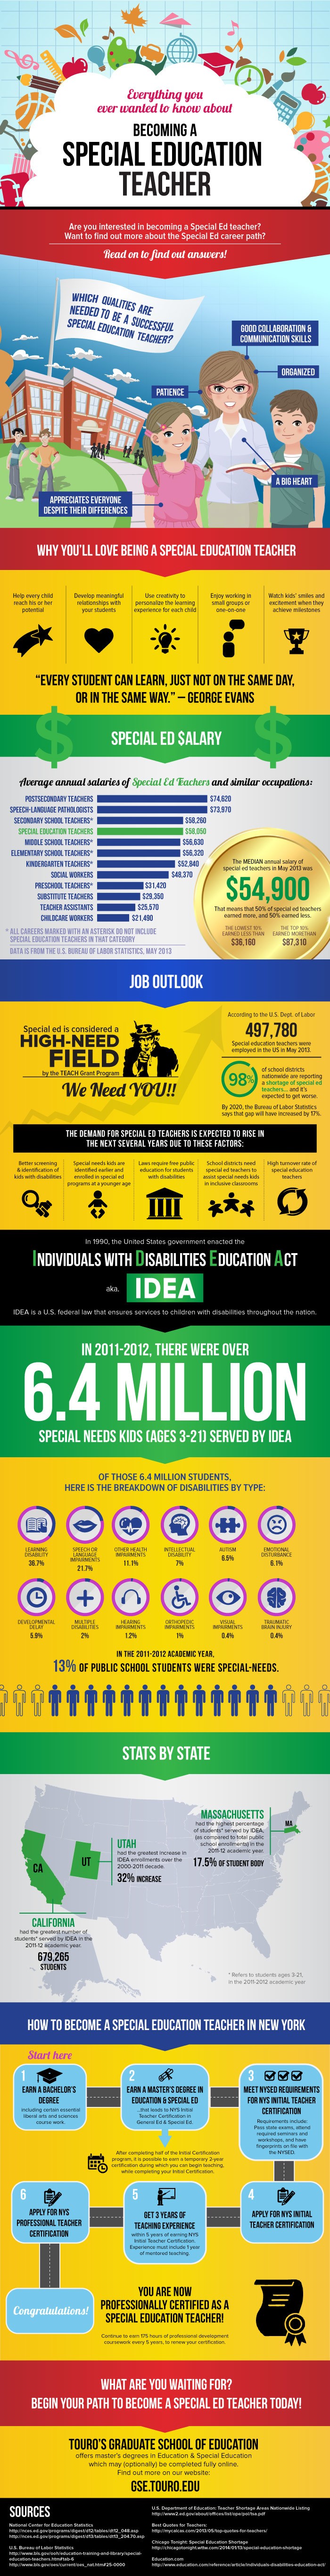 How To Become a Special Education Teacher Infographic